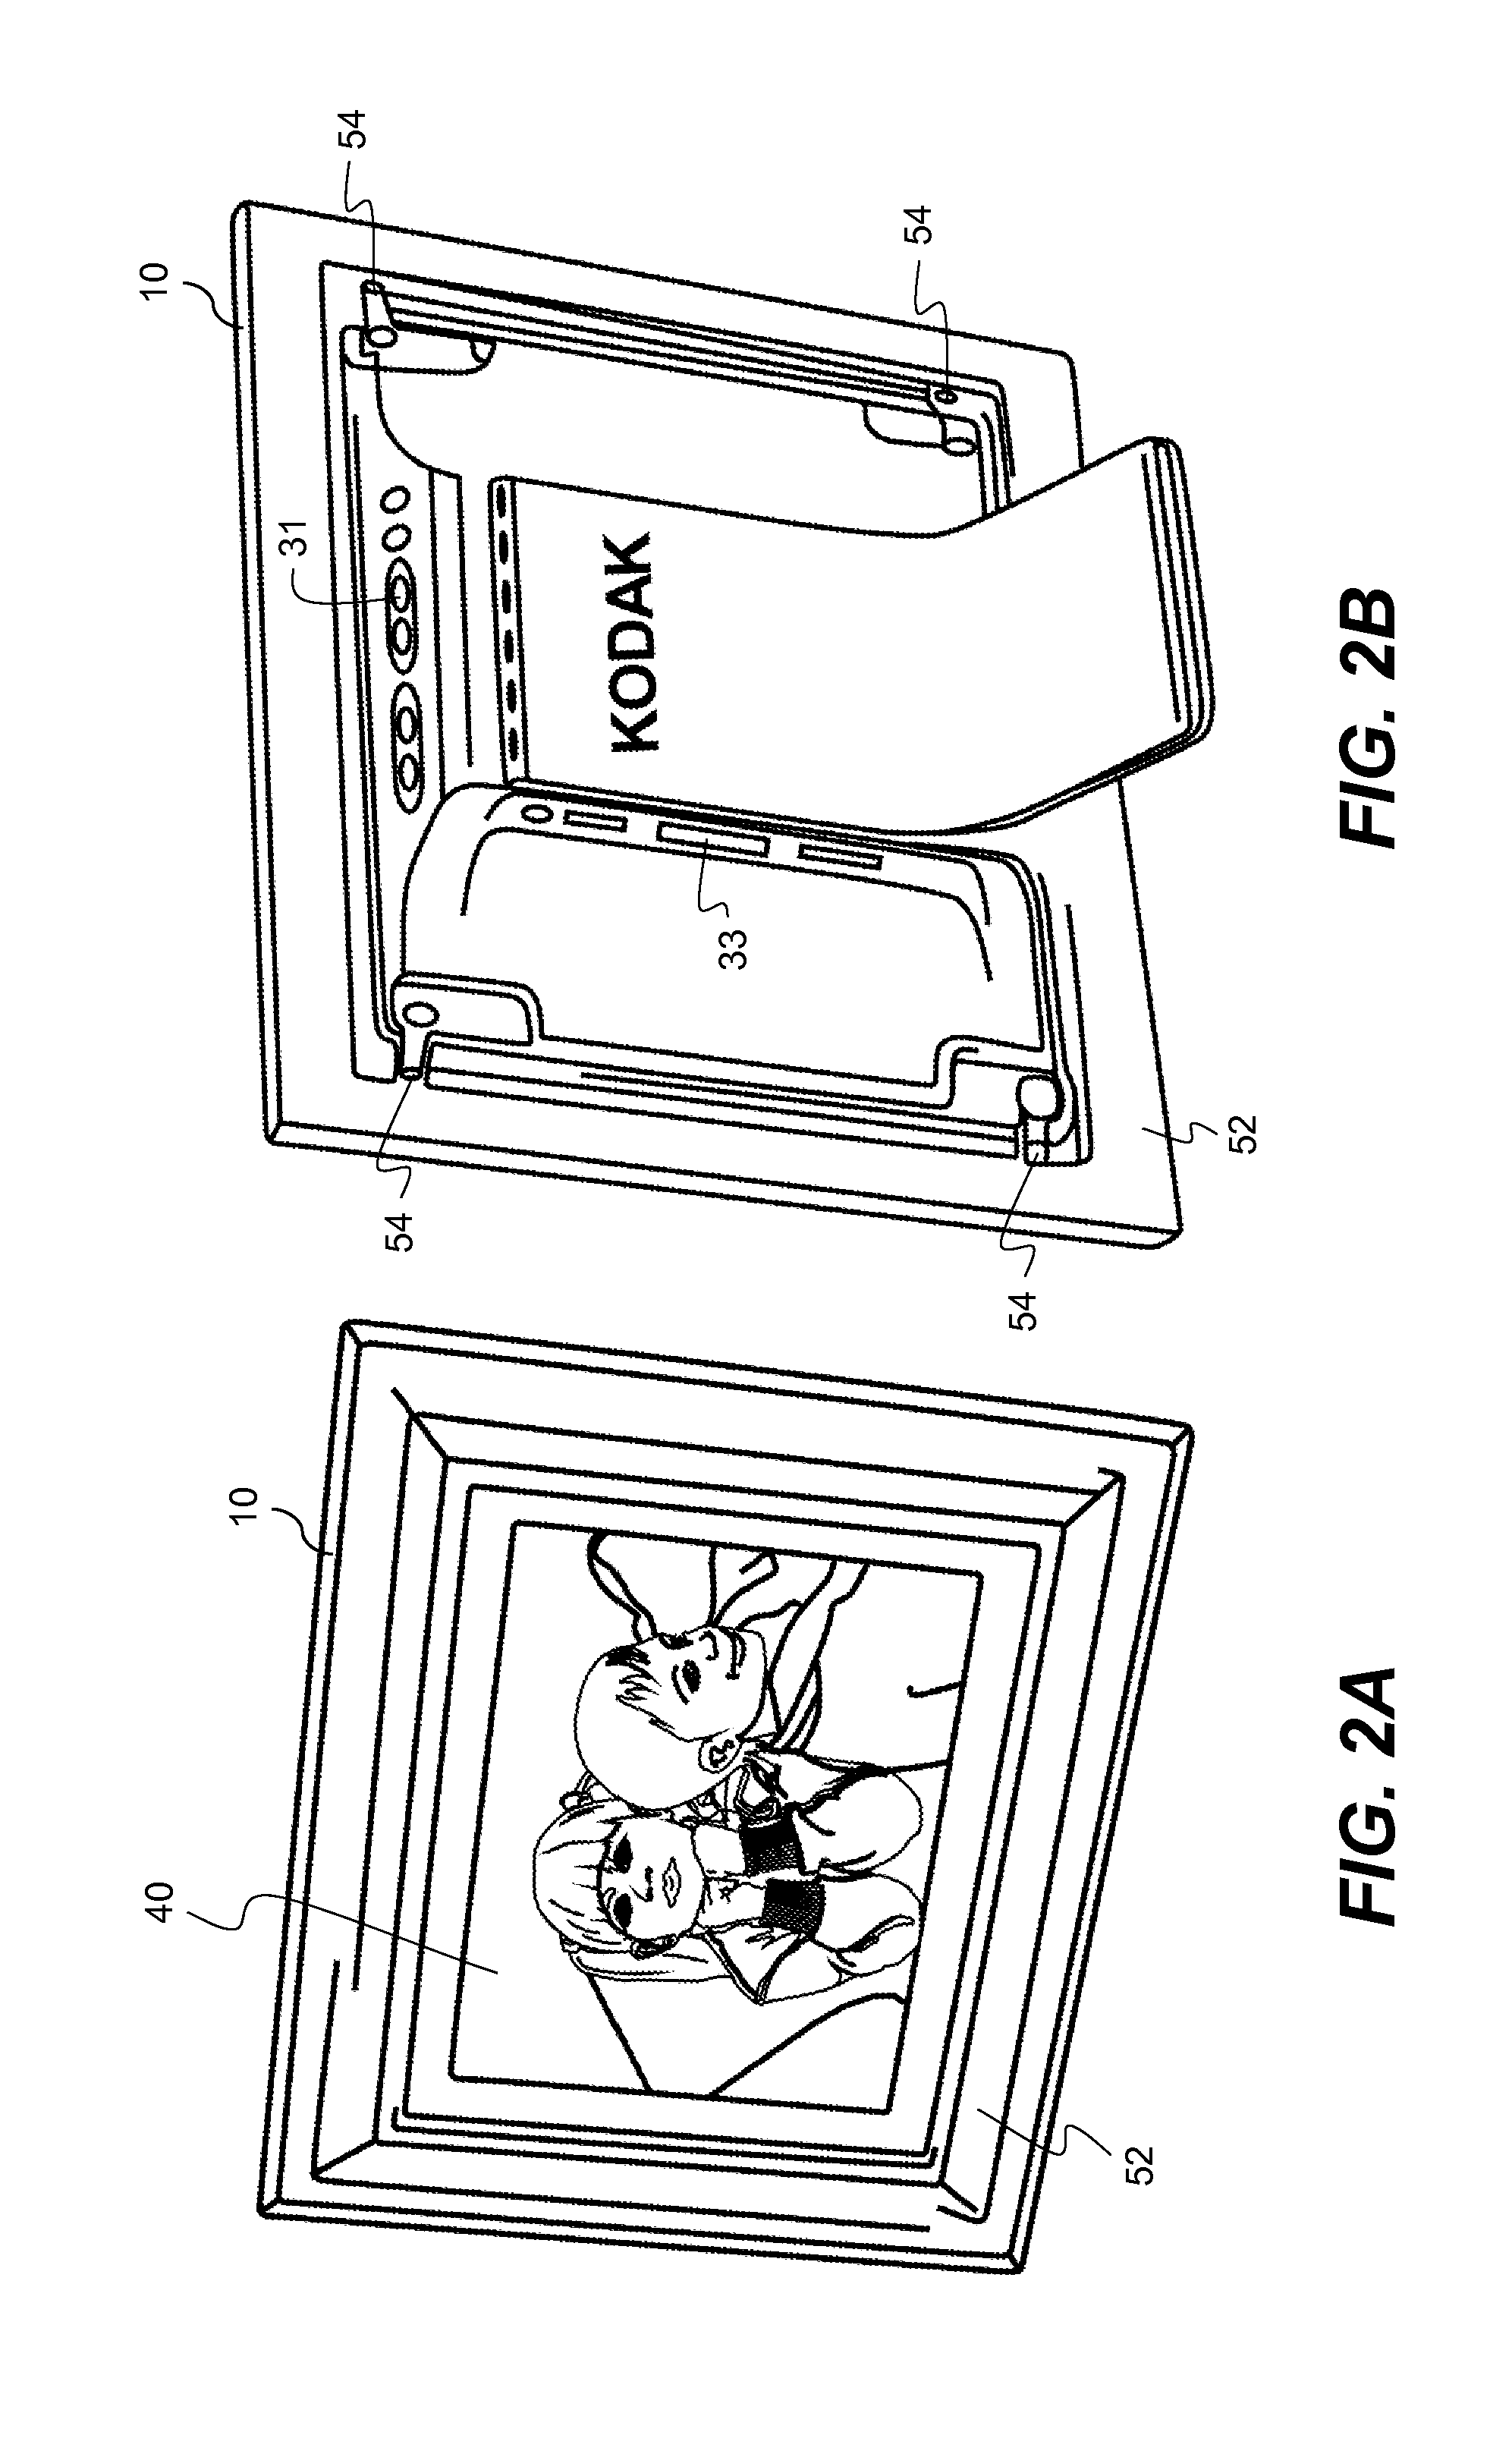 Digital image display device with automatically adjusted image display durations